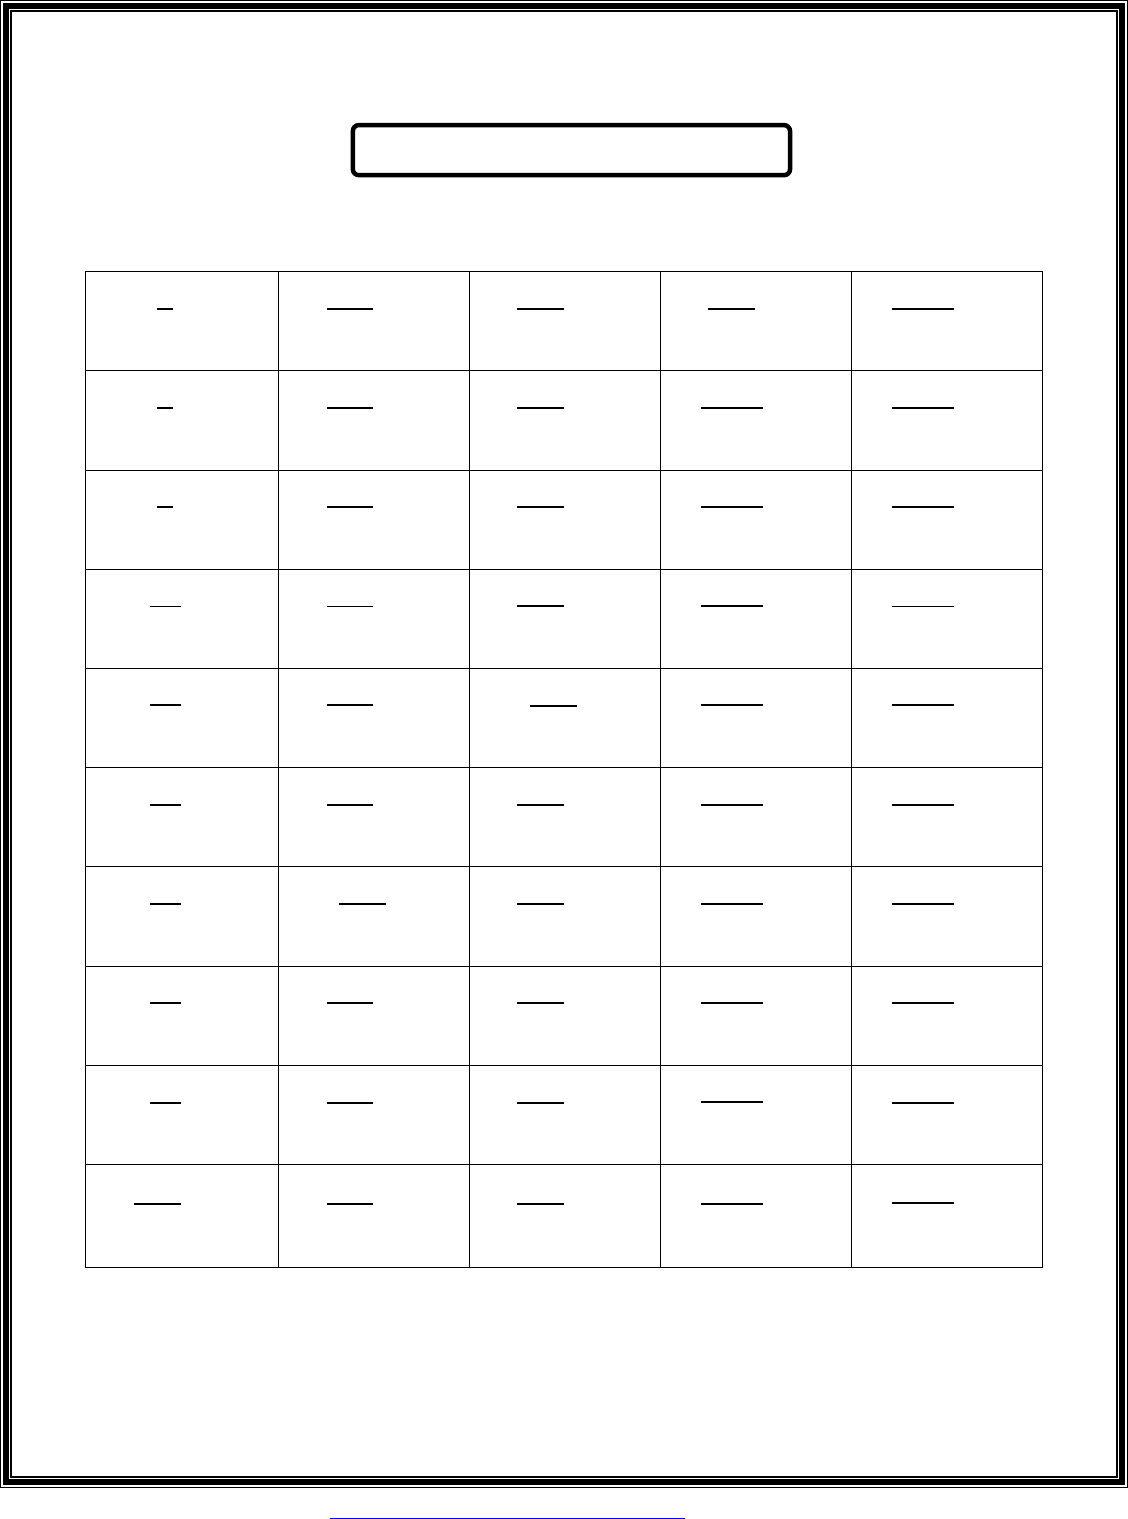 free-perfect-square-roots-chart-1-50-pdf-42kb-1-page-s